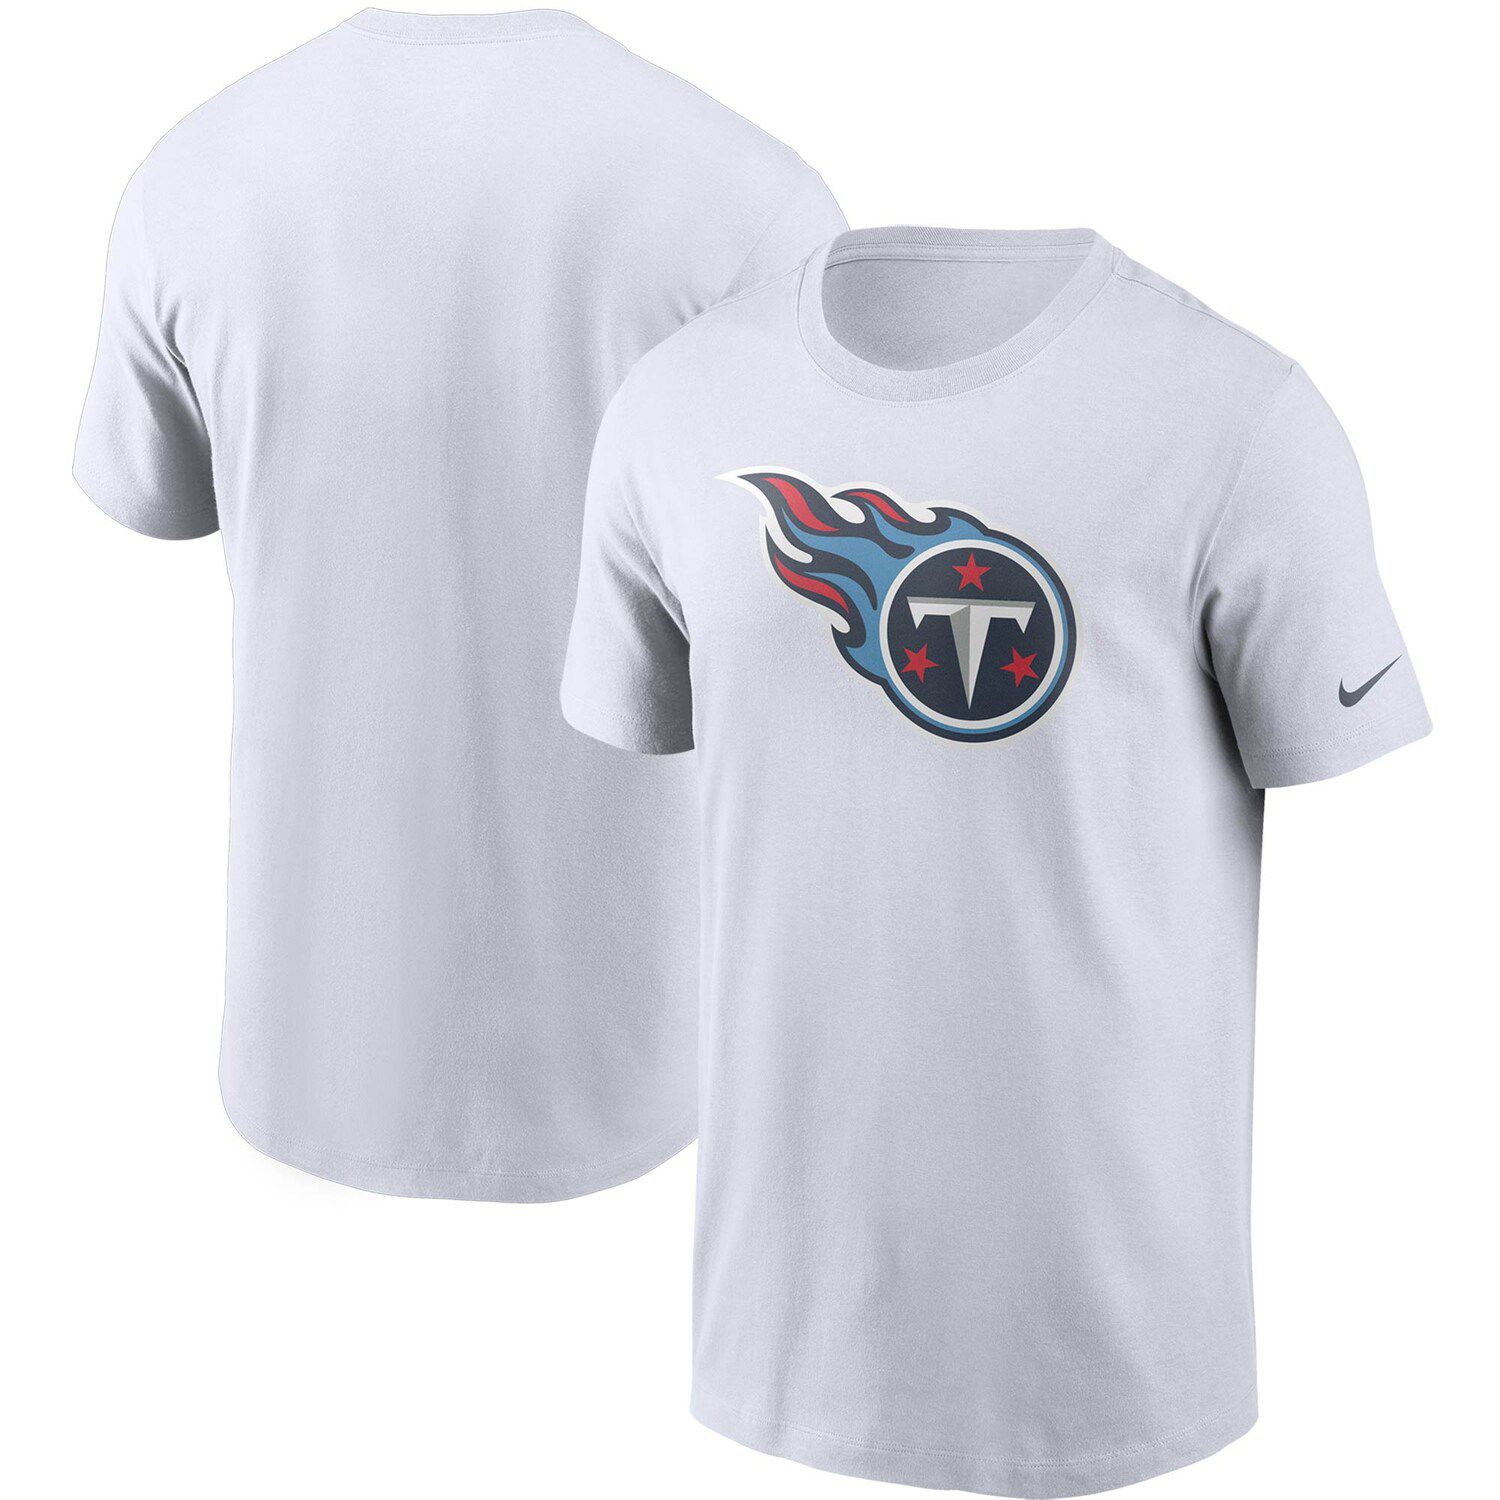 Tennessee Titans Primary Logo T-Shirt